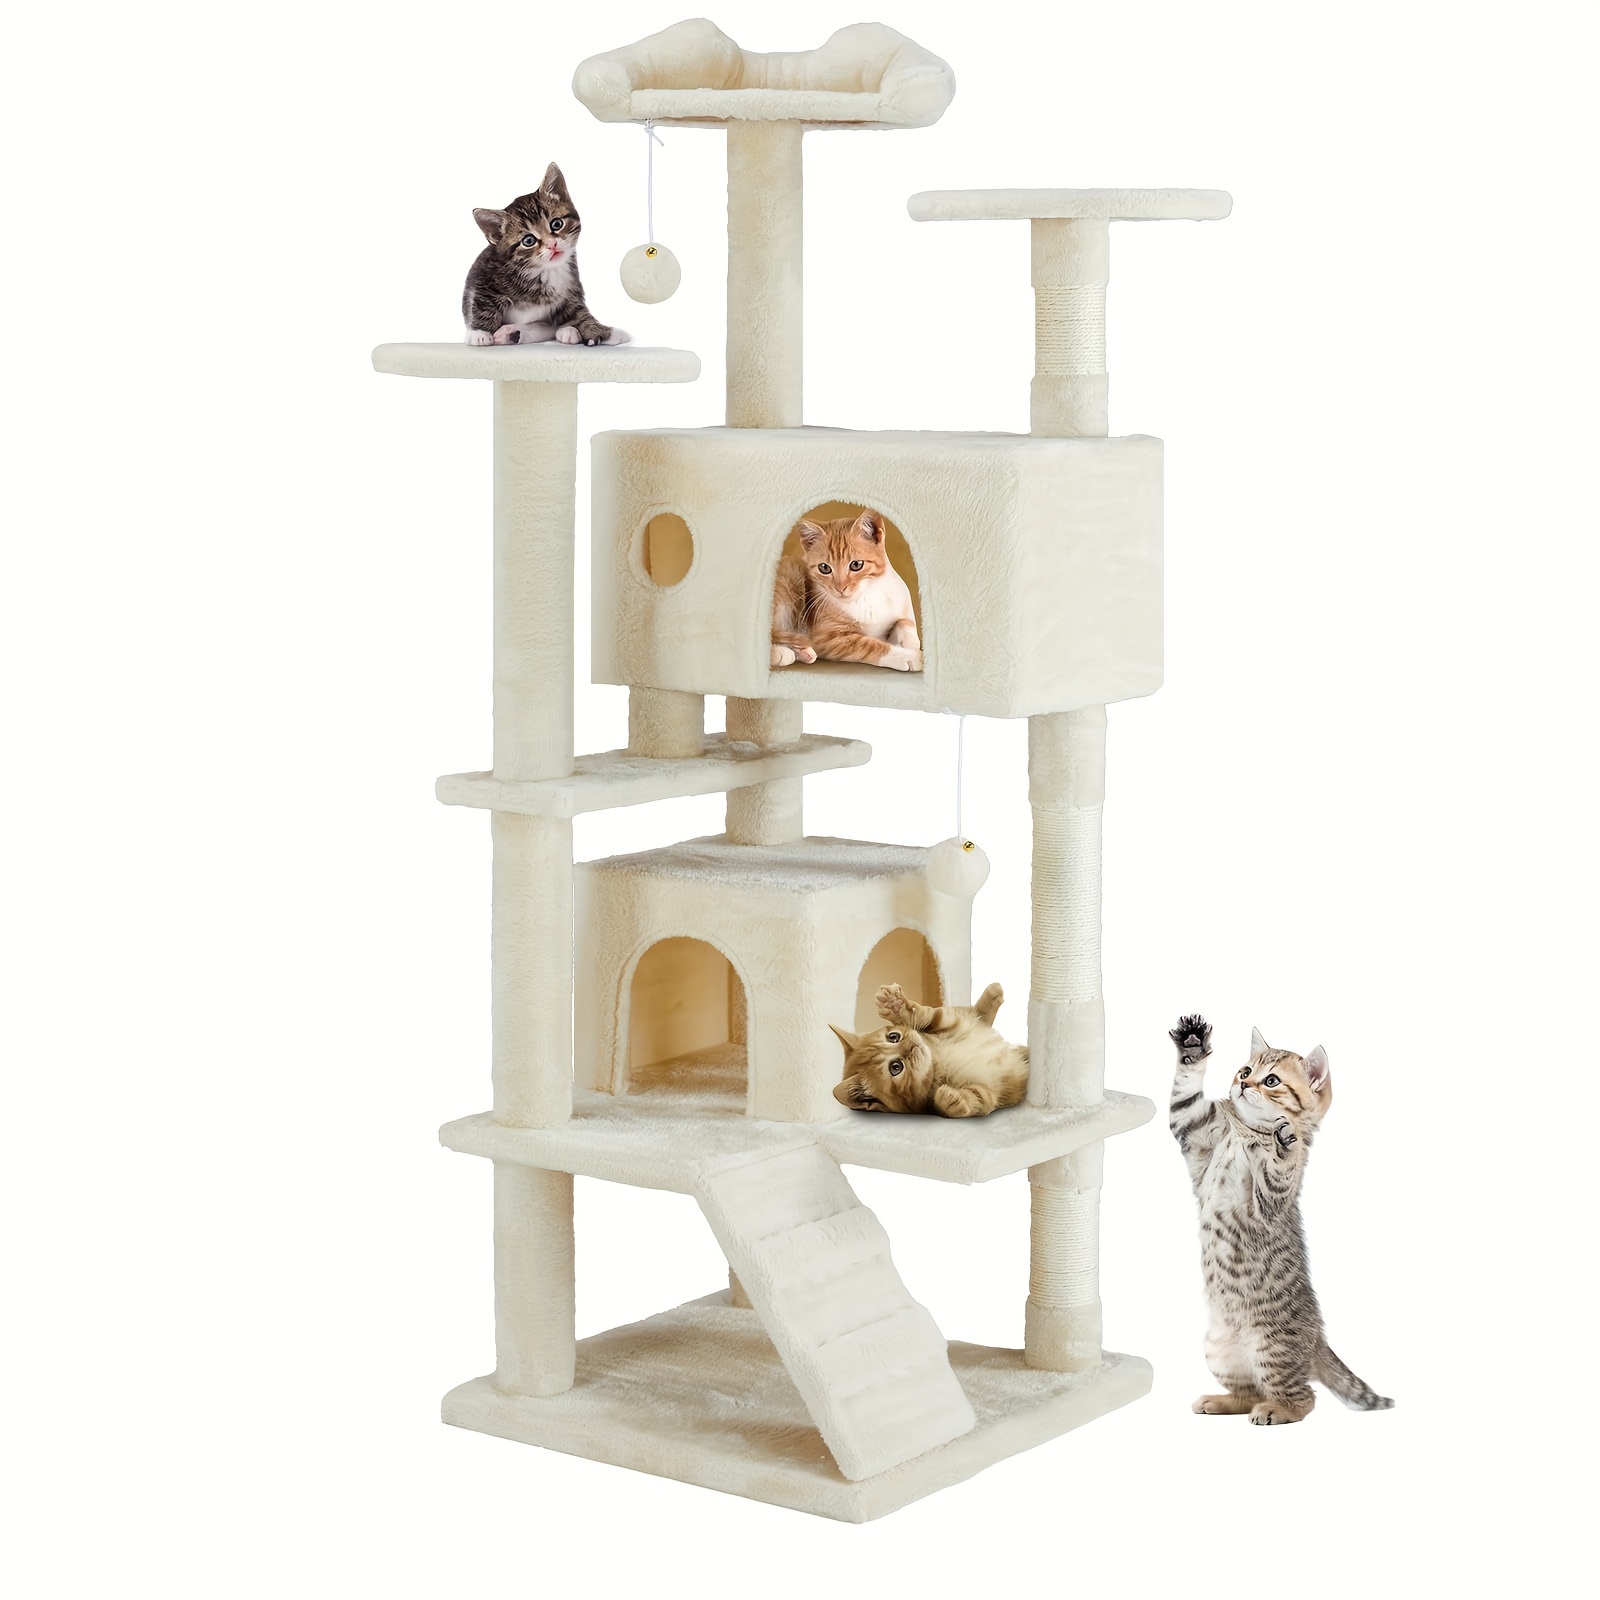 

Smug 54in Cat Tree, Indoor Cats Tall Multi-level Tower, House With Large Condo, Natural Sisal Scratching Post, Climbing Ladder, Dangling Toy For Kitty, Kitten, Wall Mount, Beige